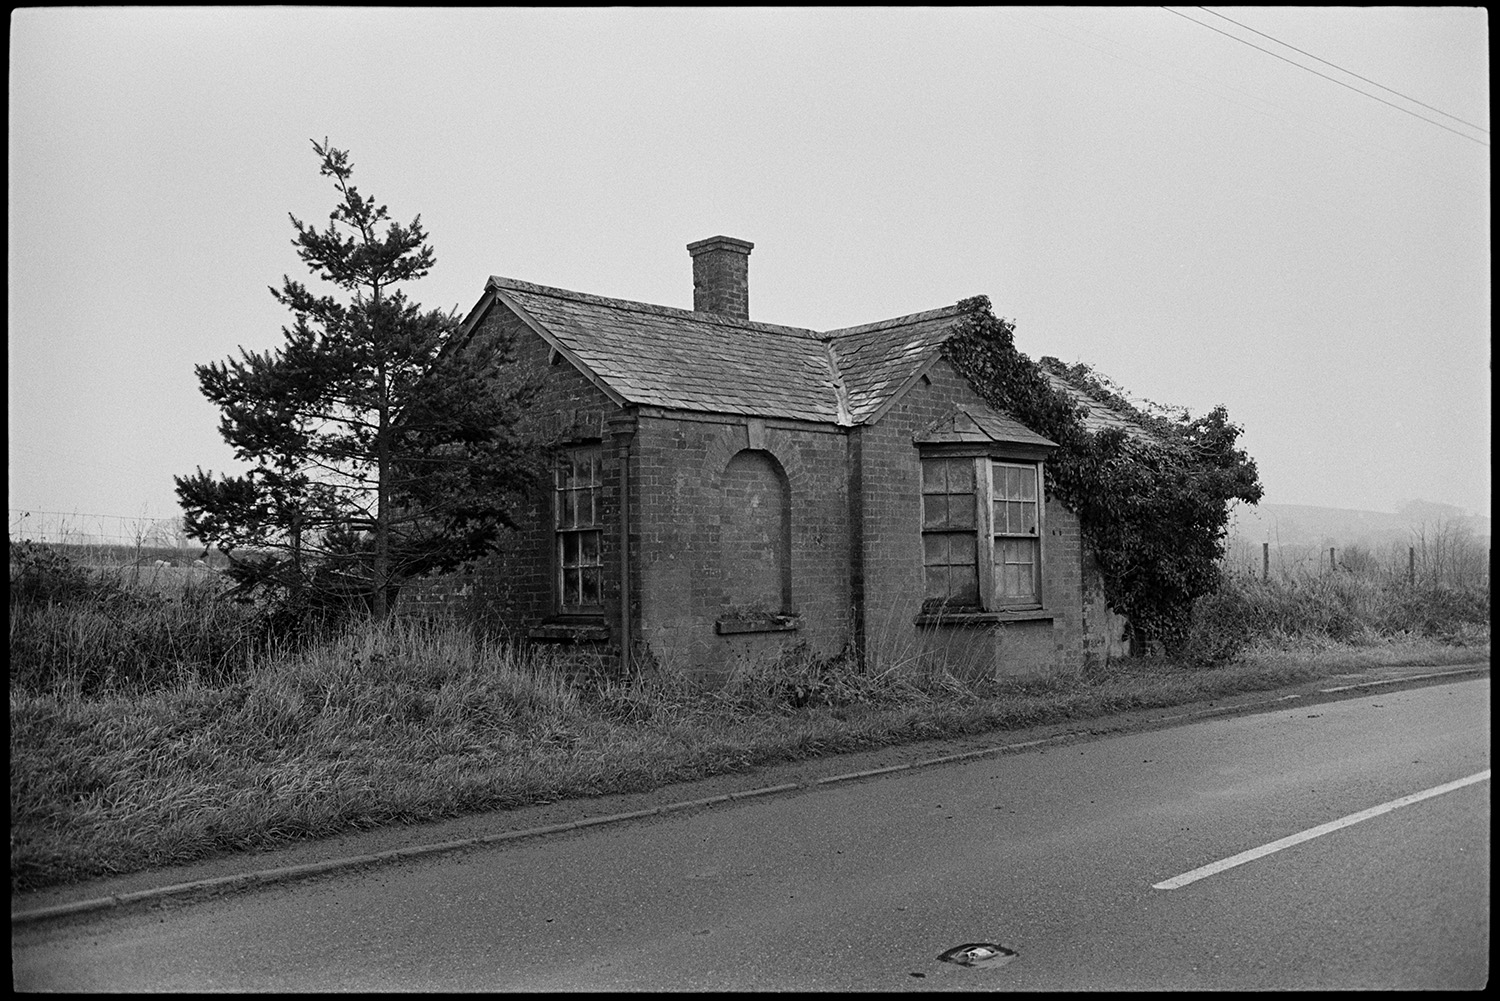 Old roadside tollhouse falling into decay.
[An old brick and slate tollhouse falling into disrepair alongside the road at Taw Bridge near Winkleigh. Ivy is covering one end of the building, with a small fir tree growing on the other side.]